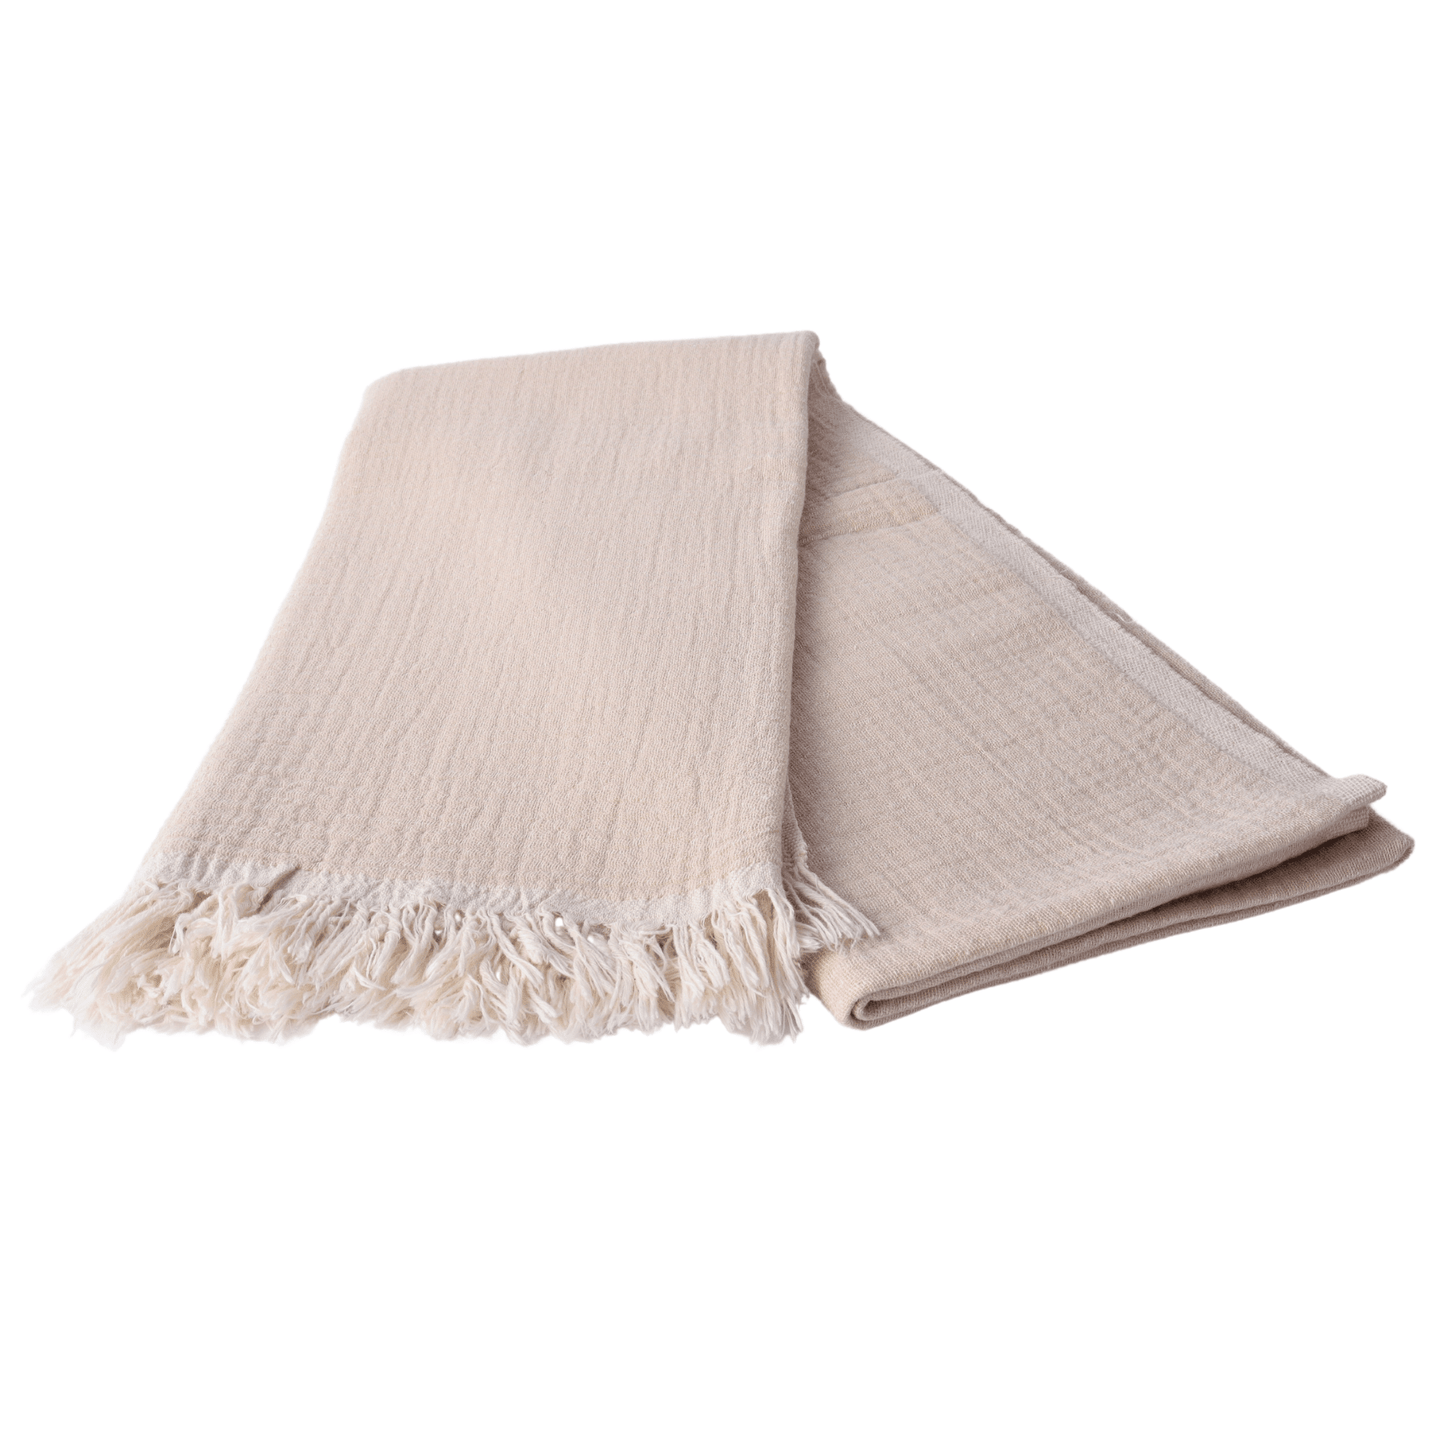 Muslin Towels for Adults natural 2